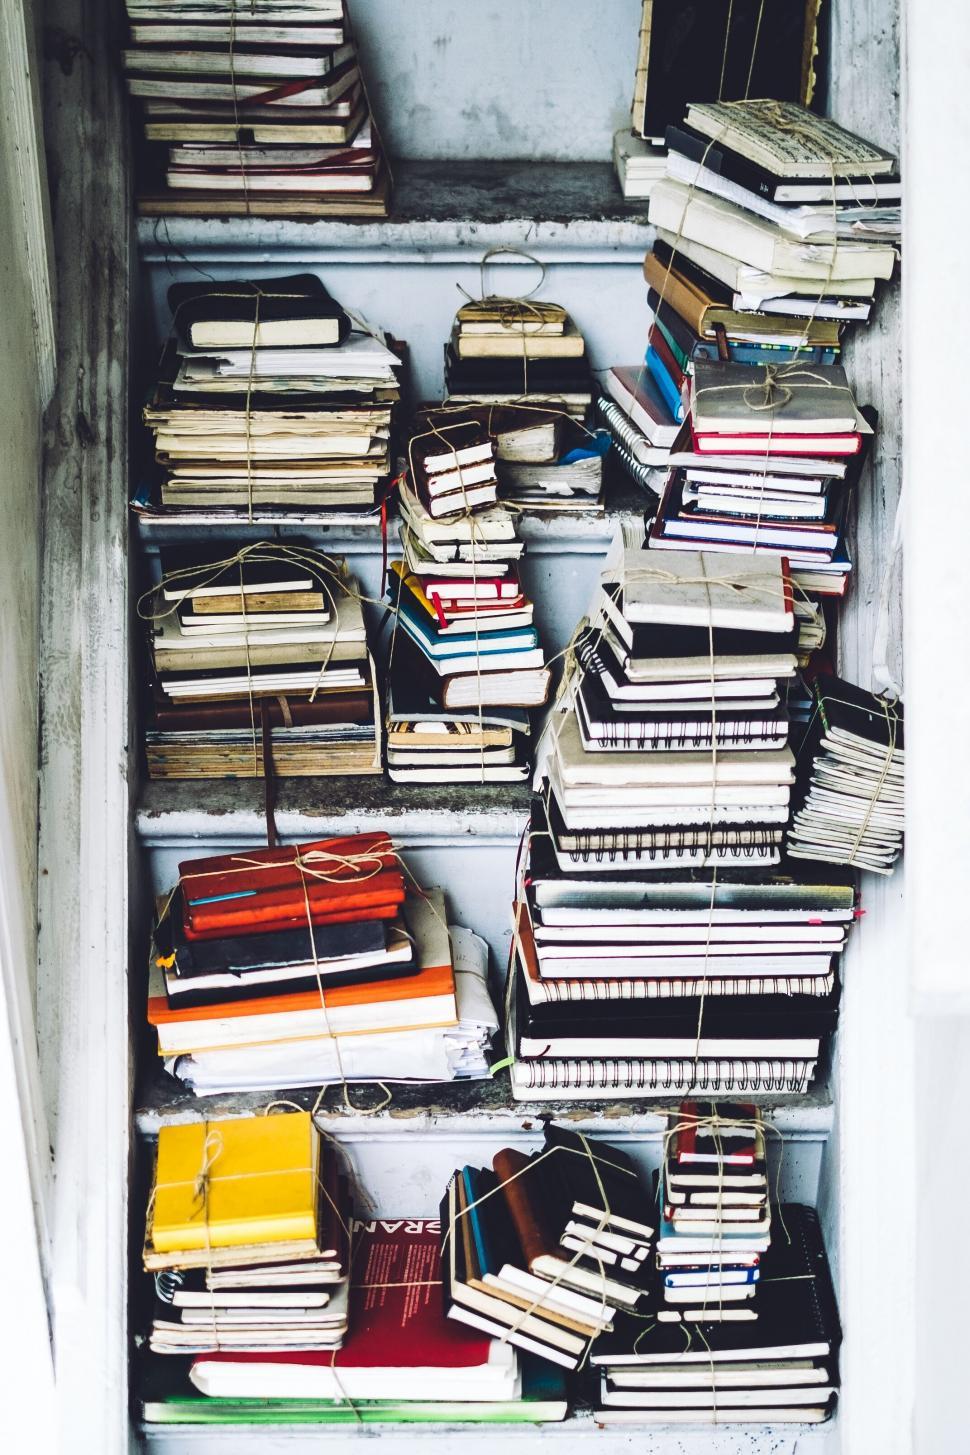 Free Image of Stacked books in an unorganized shelf 